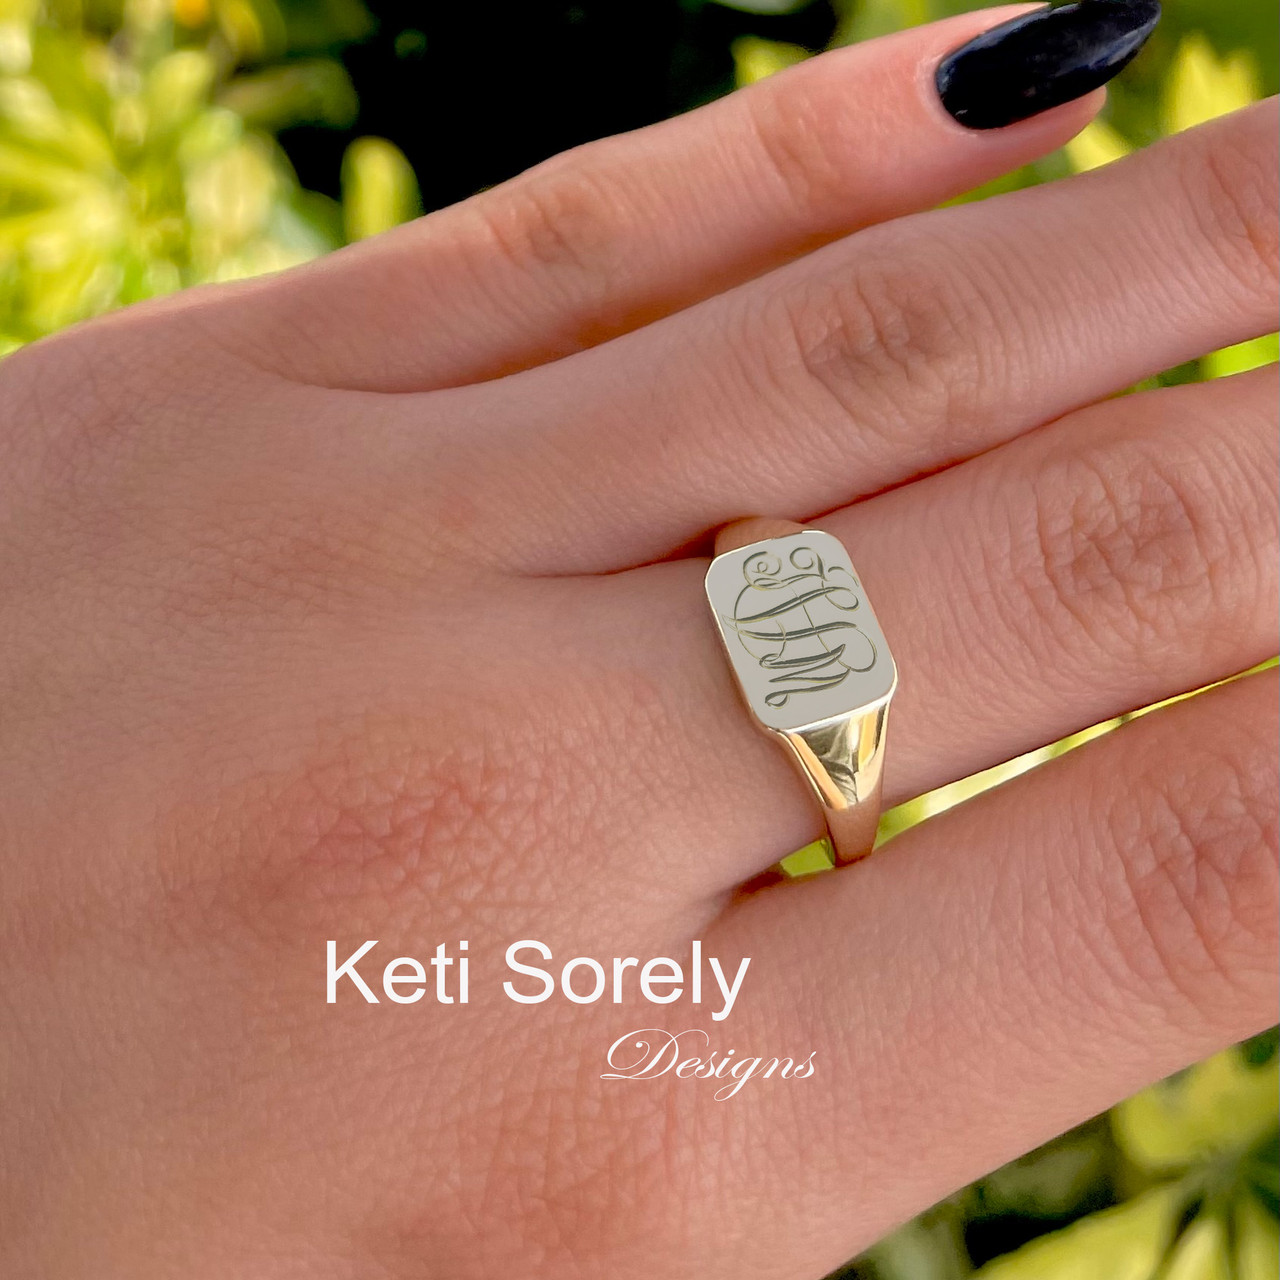 Personalized signet ring with engraved monogrammed Initials for woman -  available in Sterling Silver, 10K gold, 14K gold or 18K gold